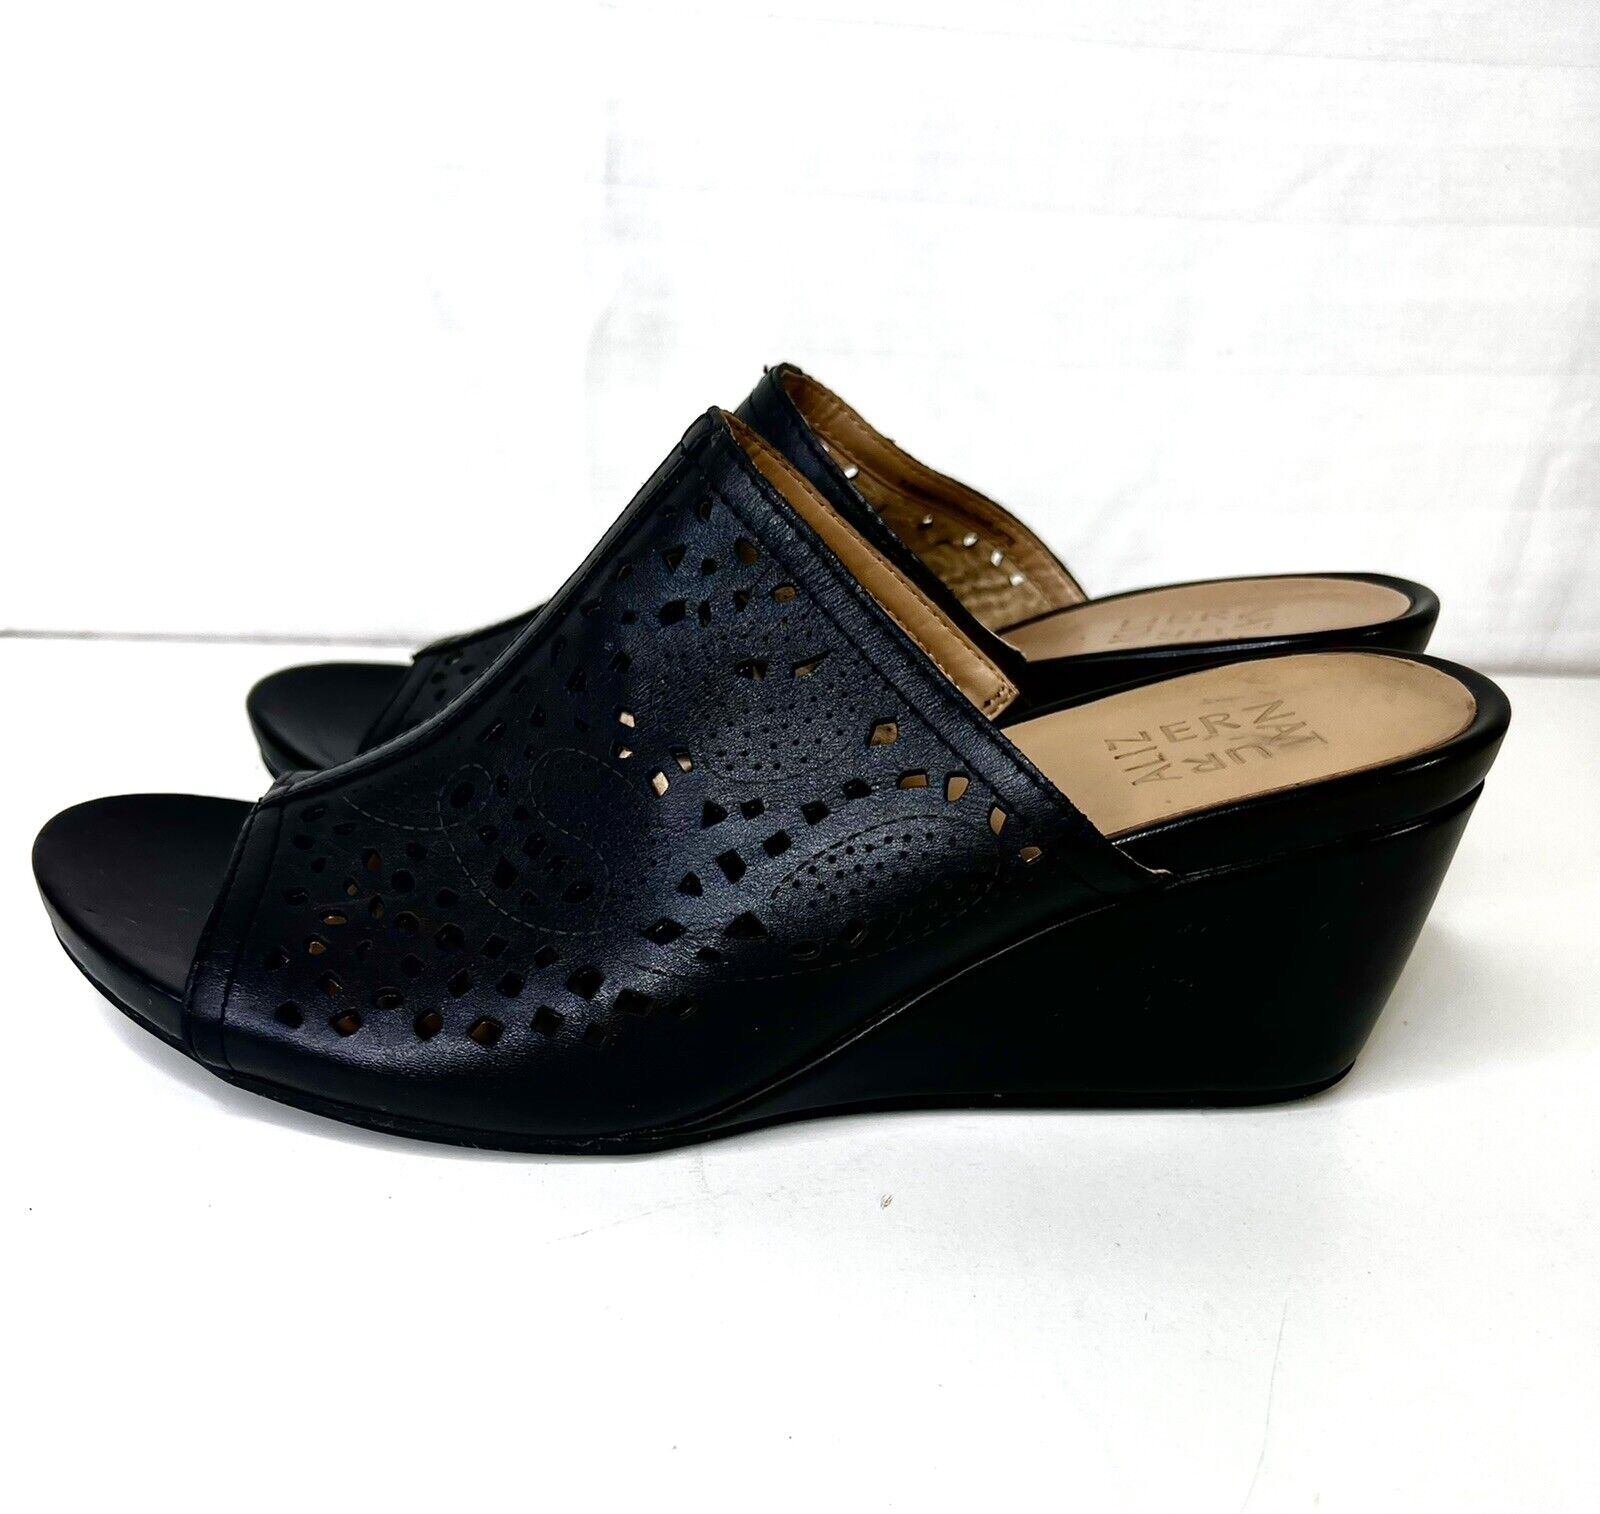 NATURALIZER Black Perforated Leather Open Toe Hee… - image 7